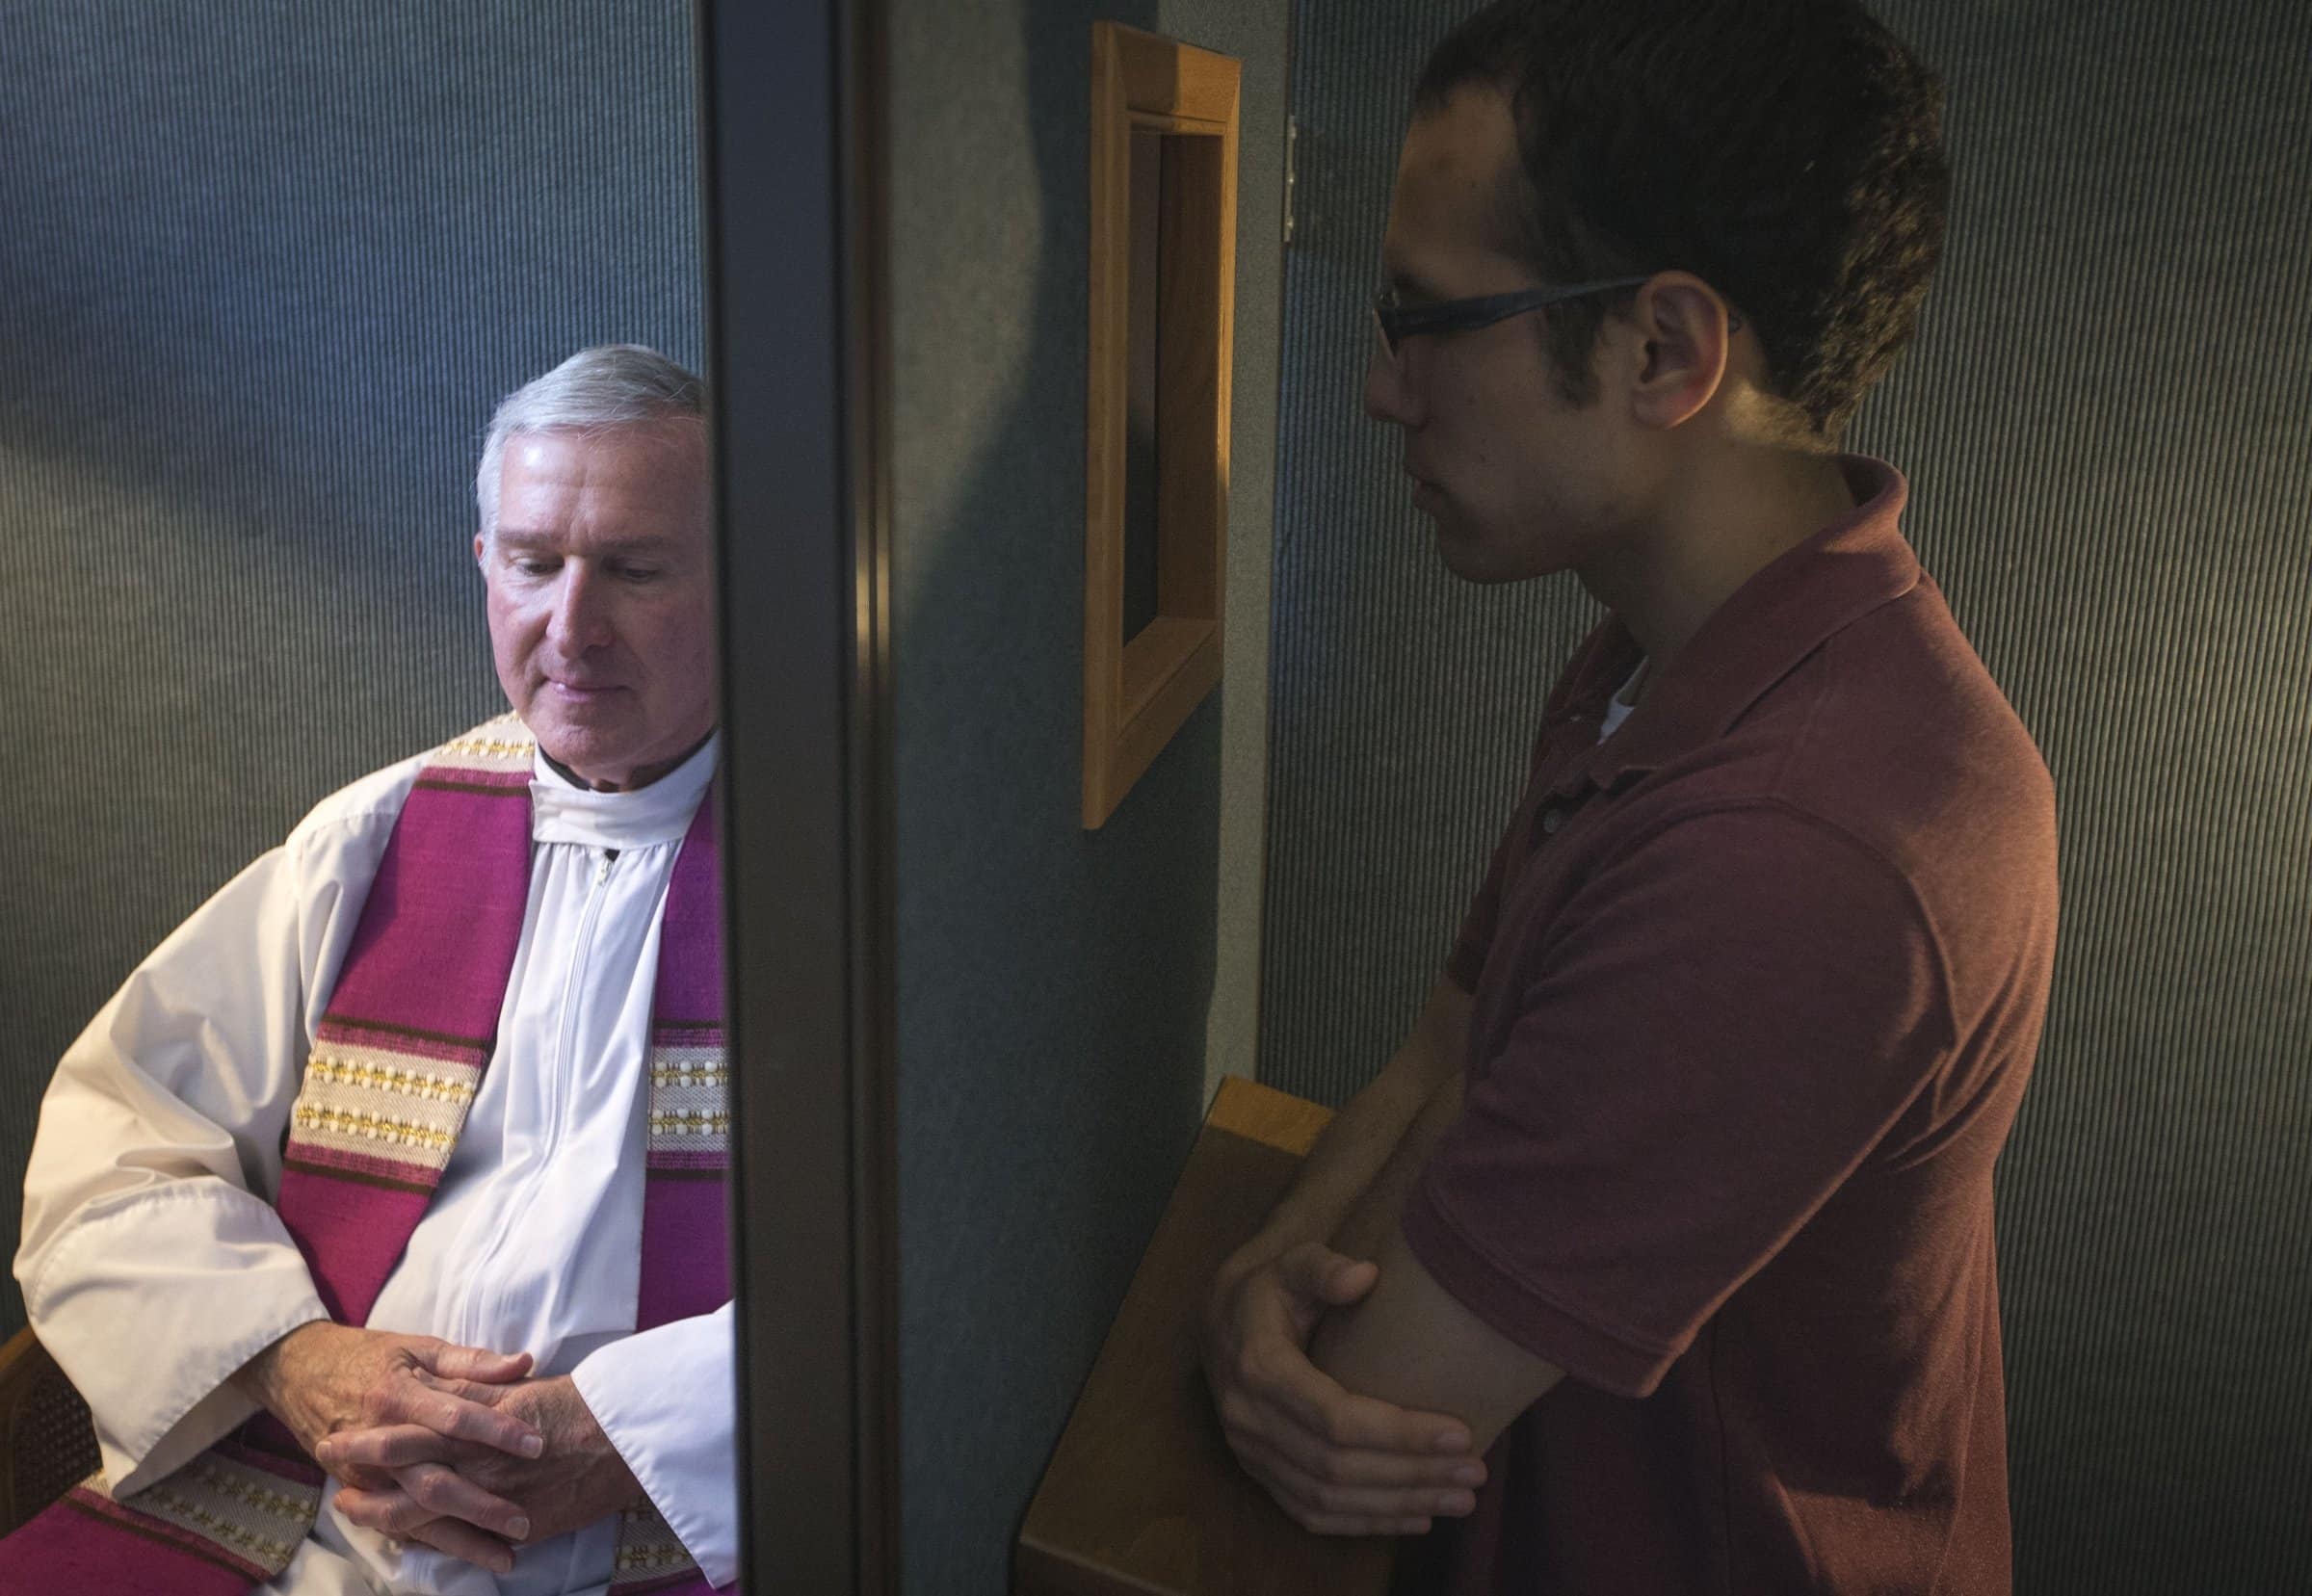 Father Timothy J. Mockaitis, pastor of Queen of Peace Catholic Church in Salem, Ore., and penitent Ethan K. Alano of Salem demonstrate how a confession is conducted May 3, 2019. The sacrament of reconciliation provides us with opportunities to continue to examine our intentions and conscience, to "come clean" with God so we may move ahead refreshed, abundantly blessed. (CNS photo/Chaz Muth)